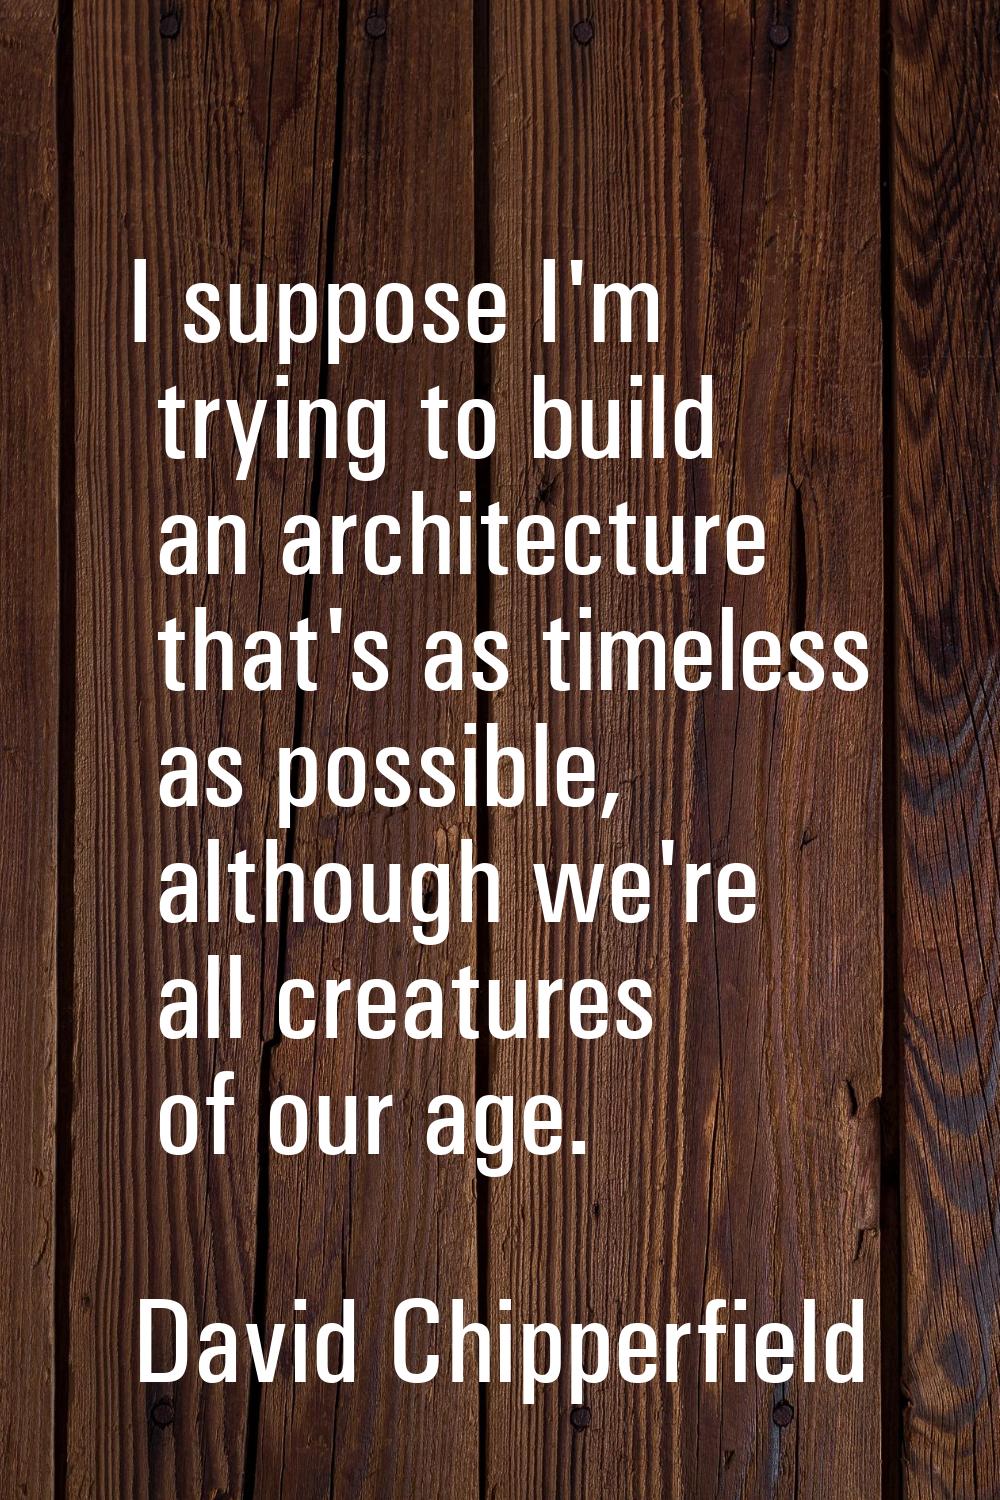 I suppose I'm trying to build an architecture that's as timeless as possible, although we're all cr